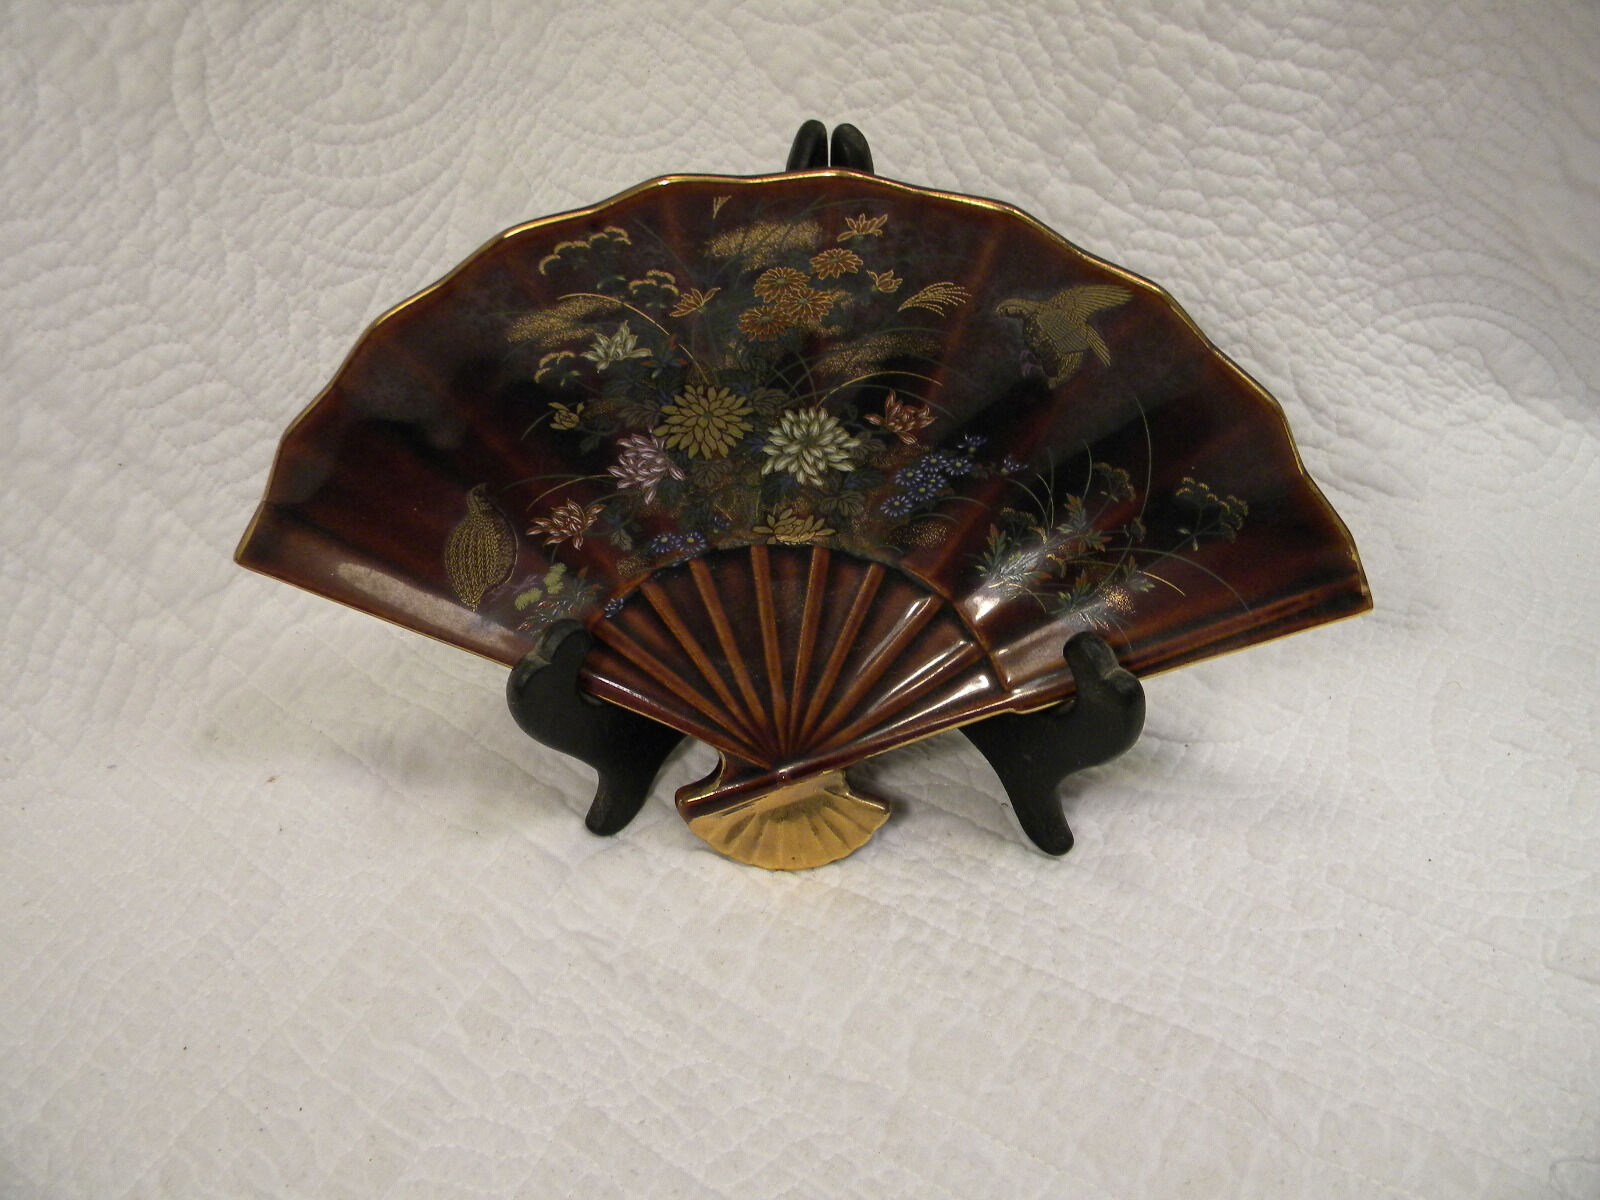 Vintage JAMAJI OMC Japan Brown Floral and Pheasants Fan Shaped Plate w/Stand